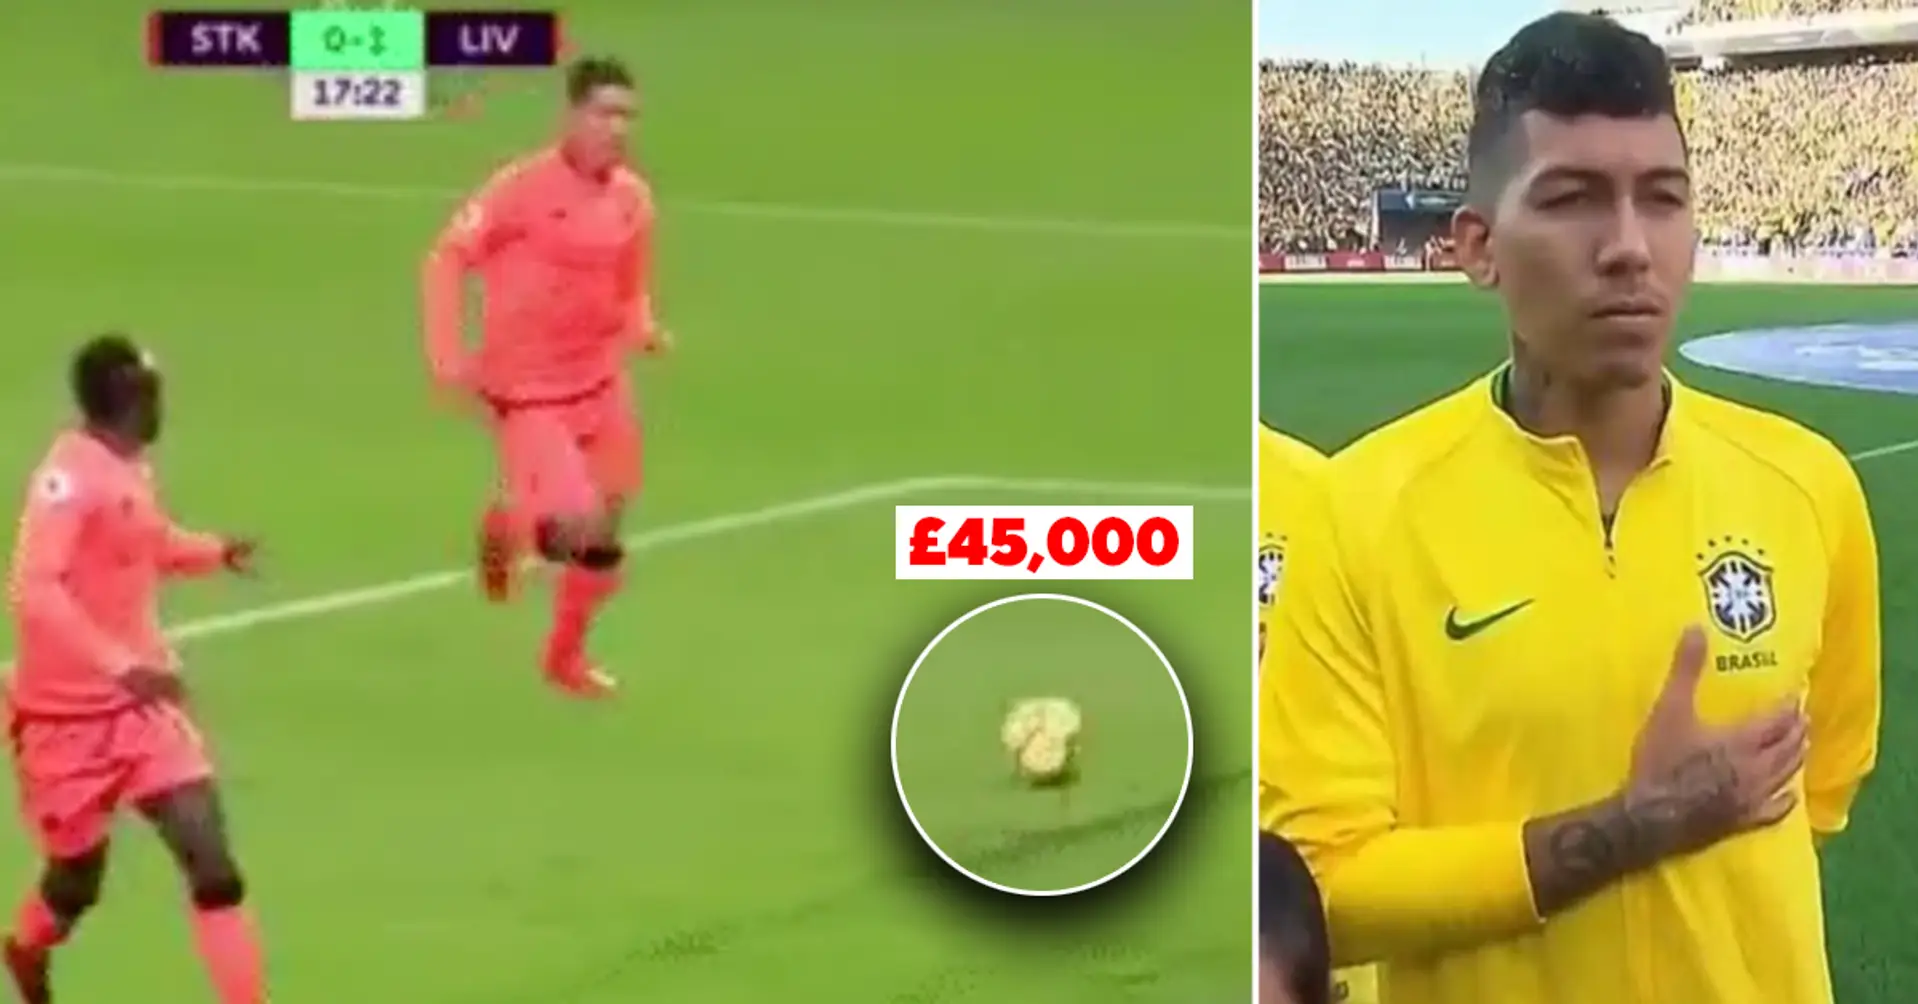 Revealed: Why Roberto Firmino lost £45,000 in one second during Liverpool match